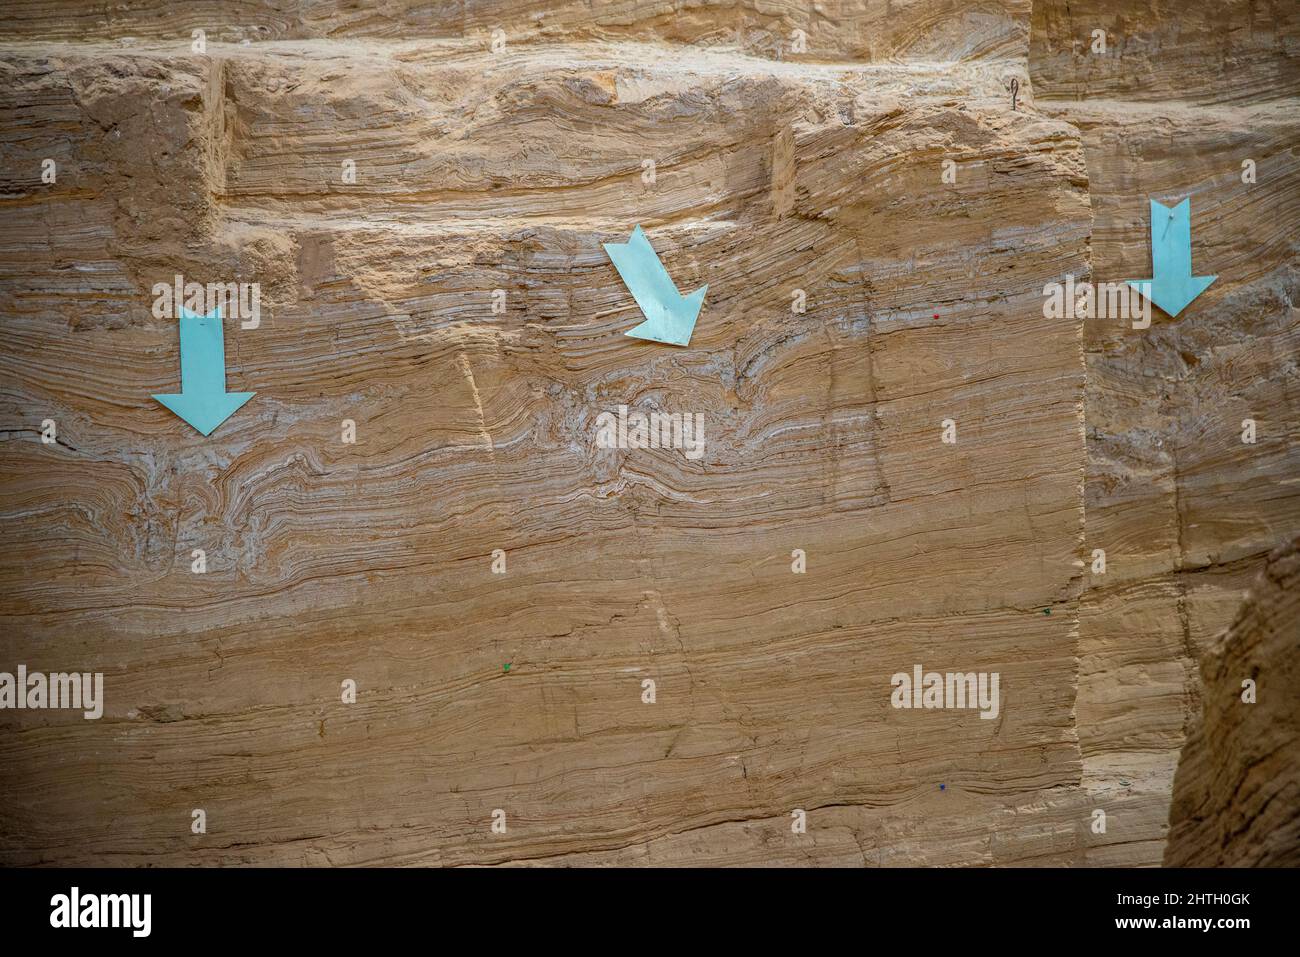 soil layers dating back to the Pleistocene era with arrows pointing a time period Stock Photo